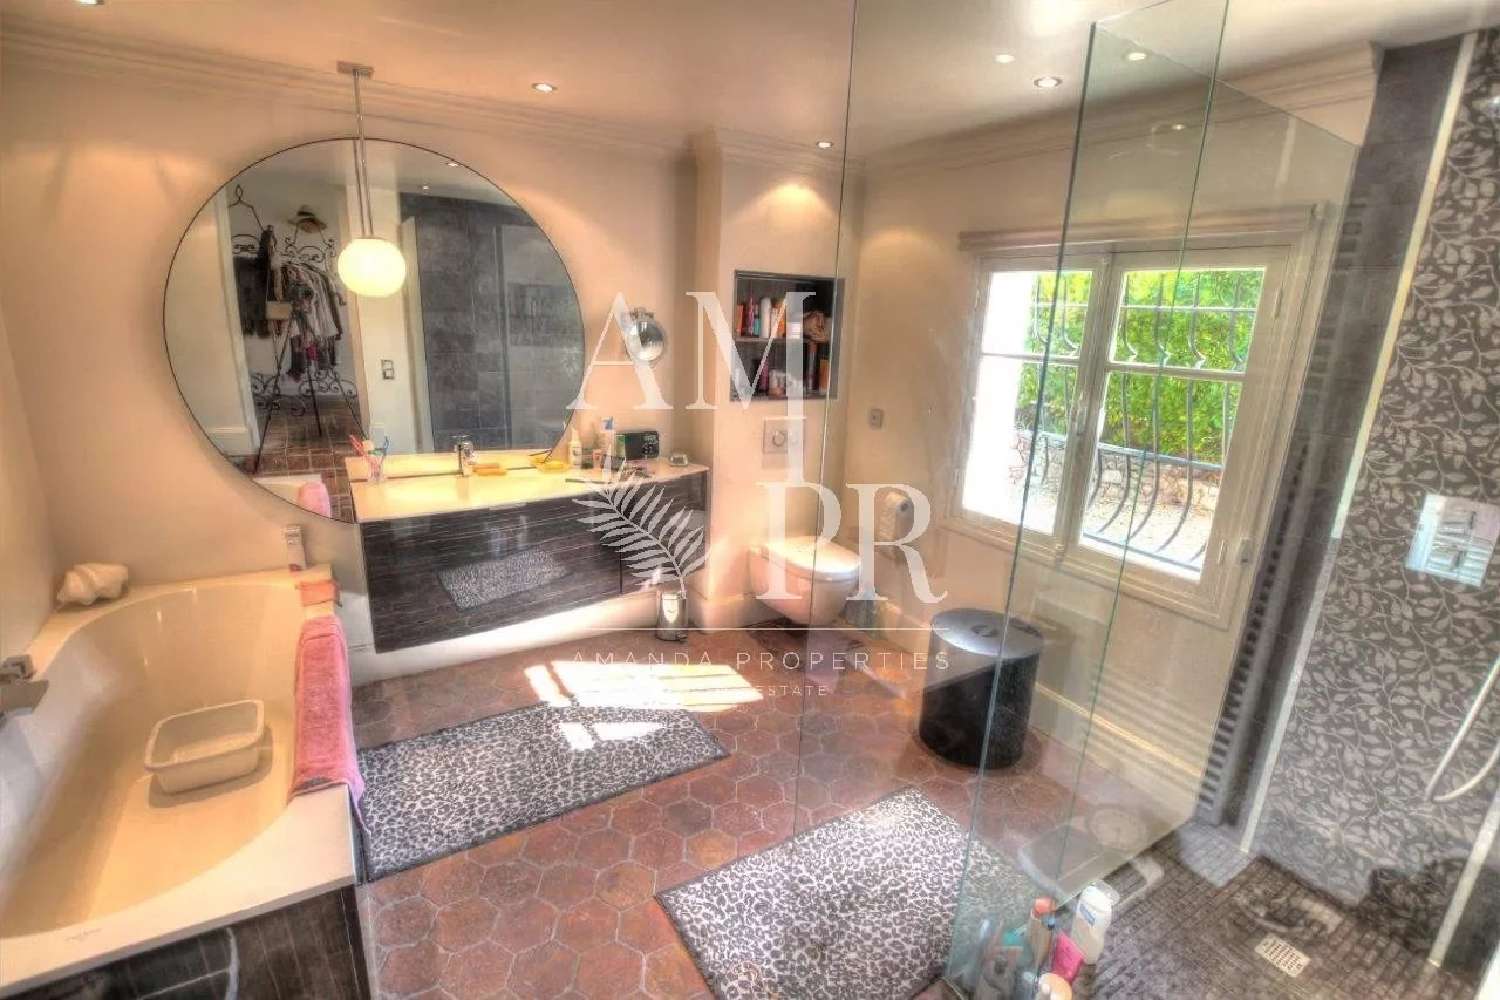  for sale house Cannes Alpes-Maritimes 5